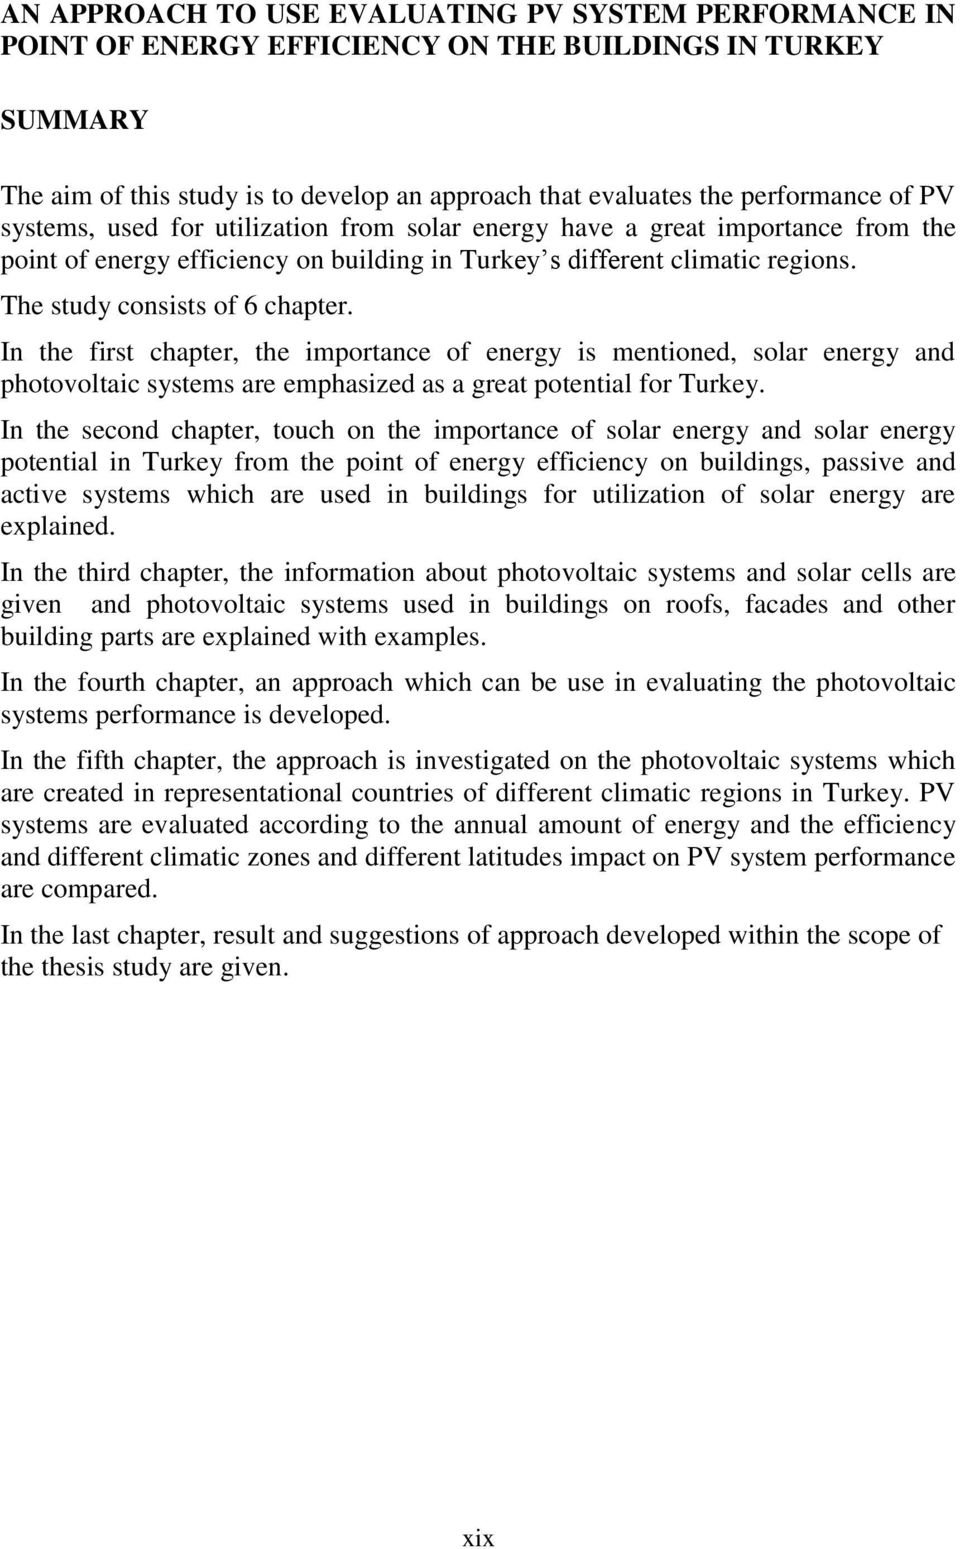 In the first chapter, the importance of energy is mentioned, solar energy and photovoltaic systems are emphasized as a great potential for Turkey.